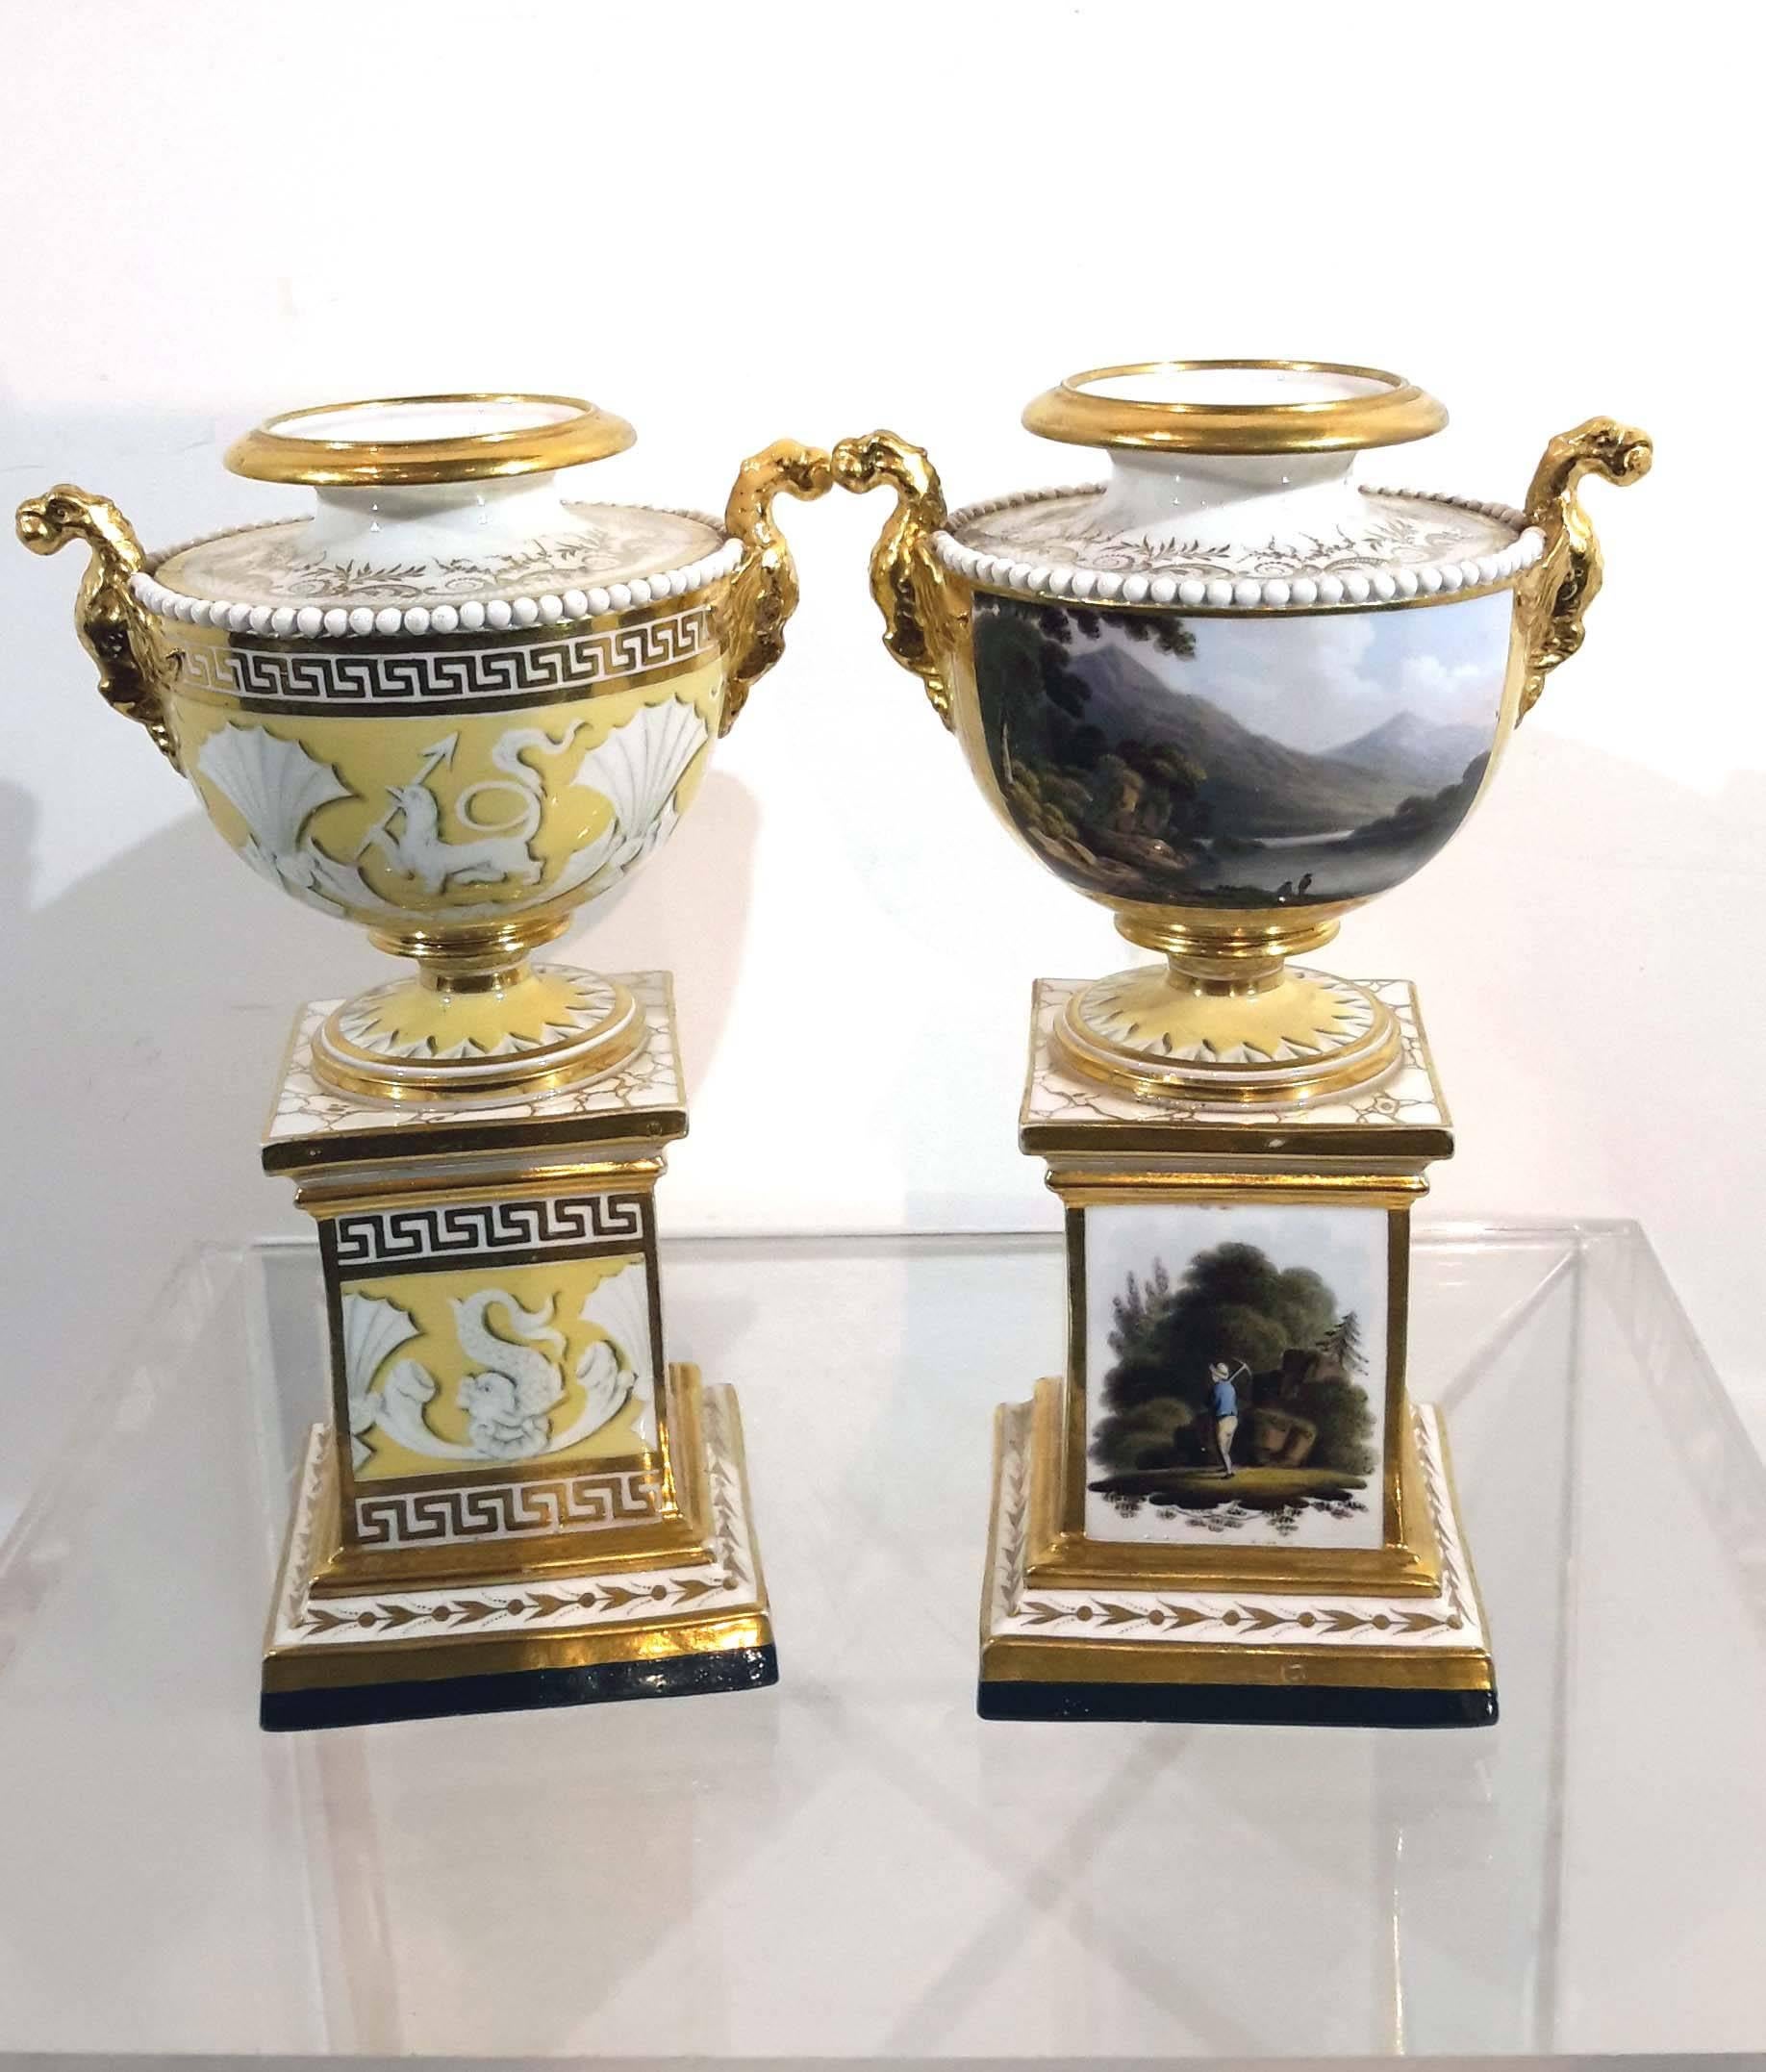 Neoclassical Pair of Exceptional Barr Flight & Barr Worcester Works Porcelain Urns circa 1810